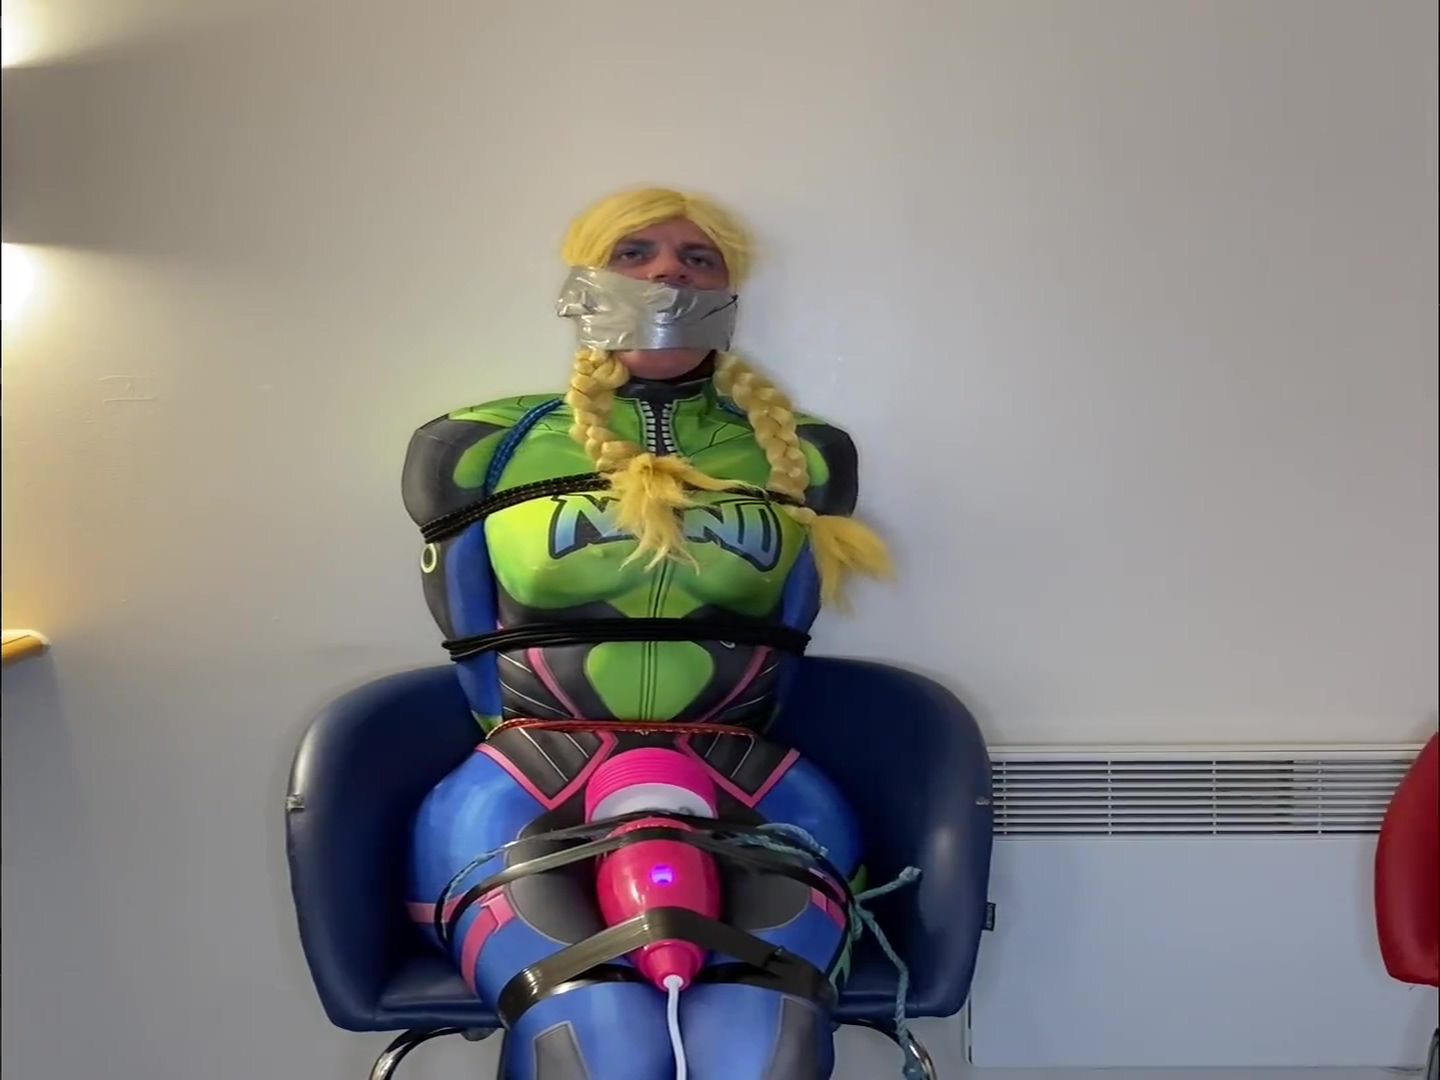 Hot Naked Girl Cd Bound, Gagged And Cumming In Costume - D Va Footfetish